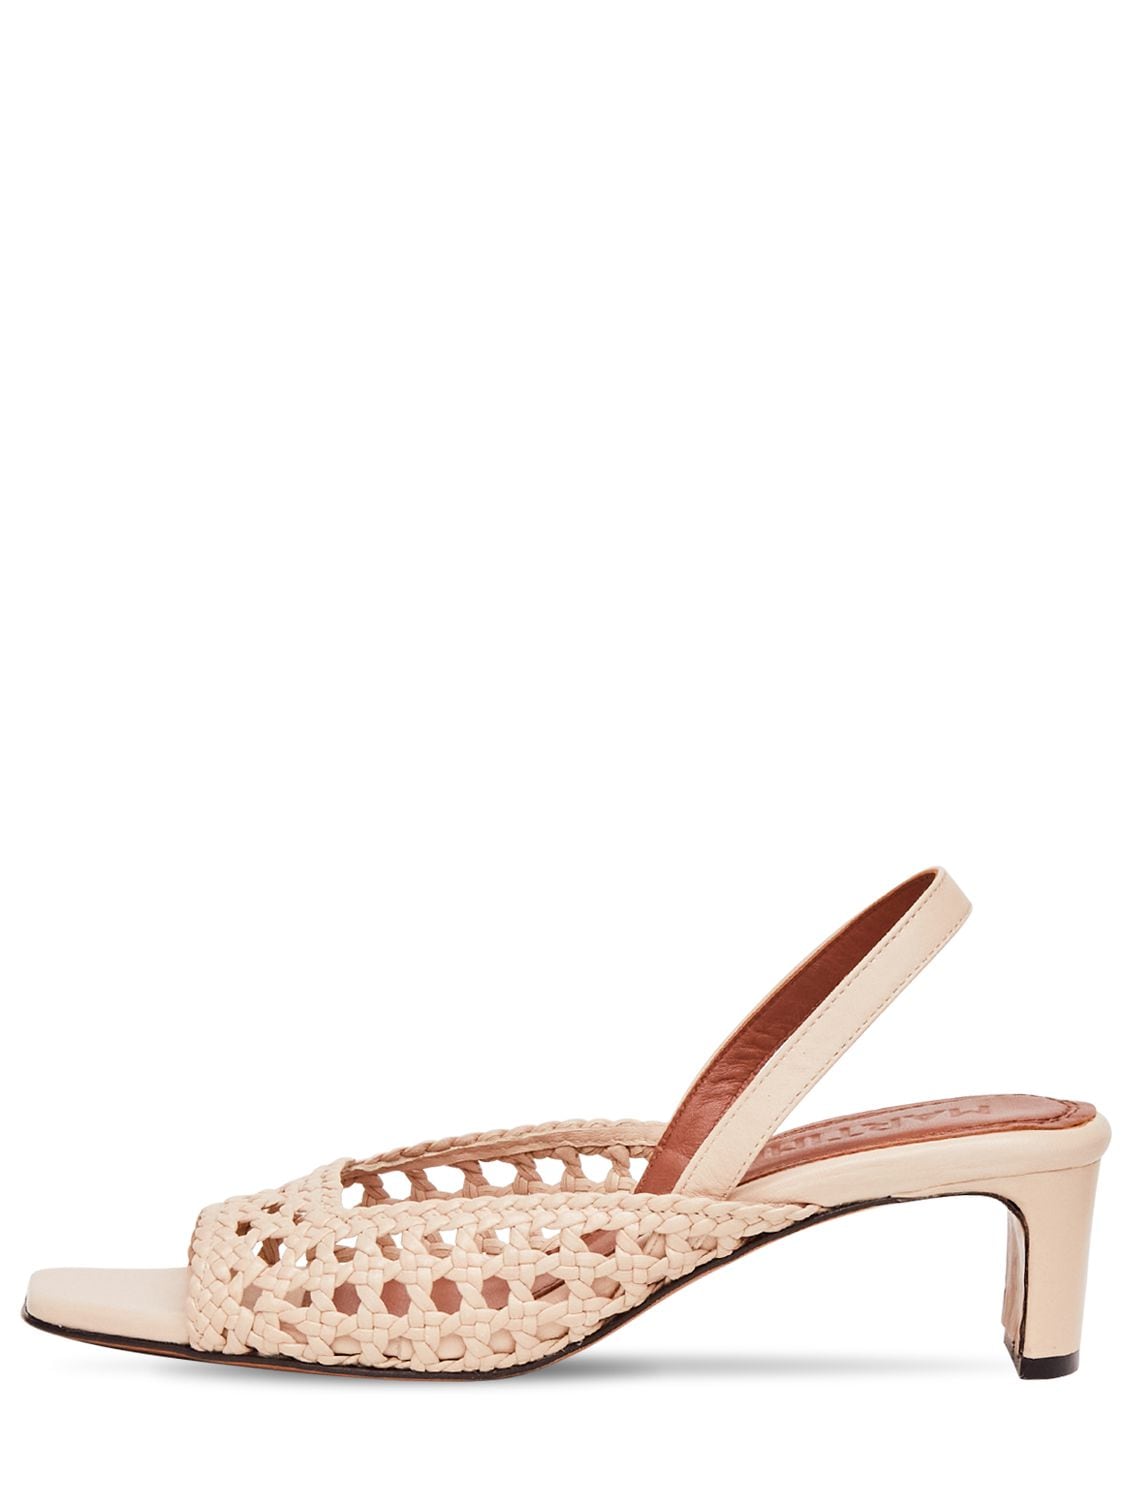 Souliers Martinez 50mm Woven Leather Sling Back Sandals In Beige